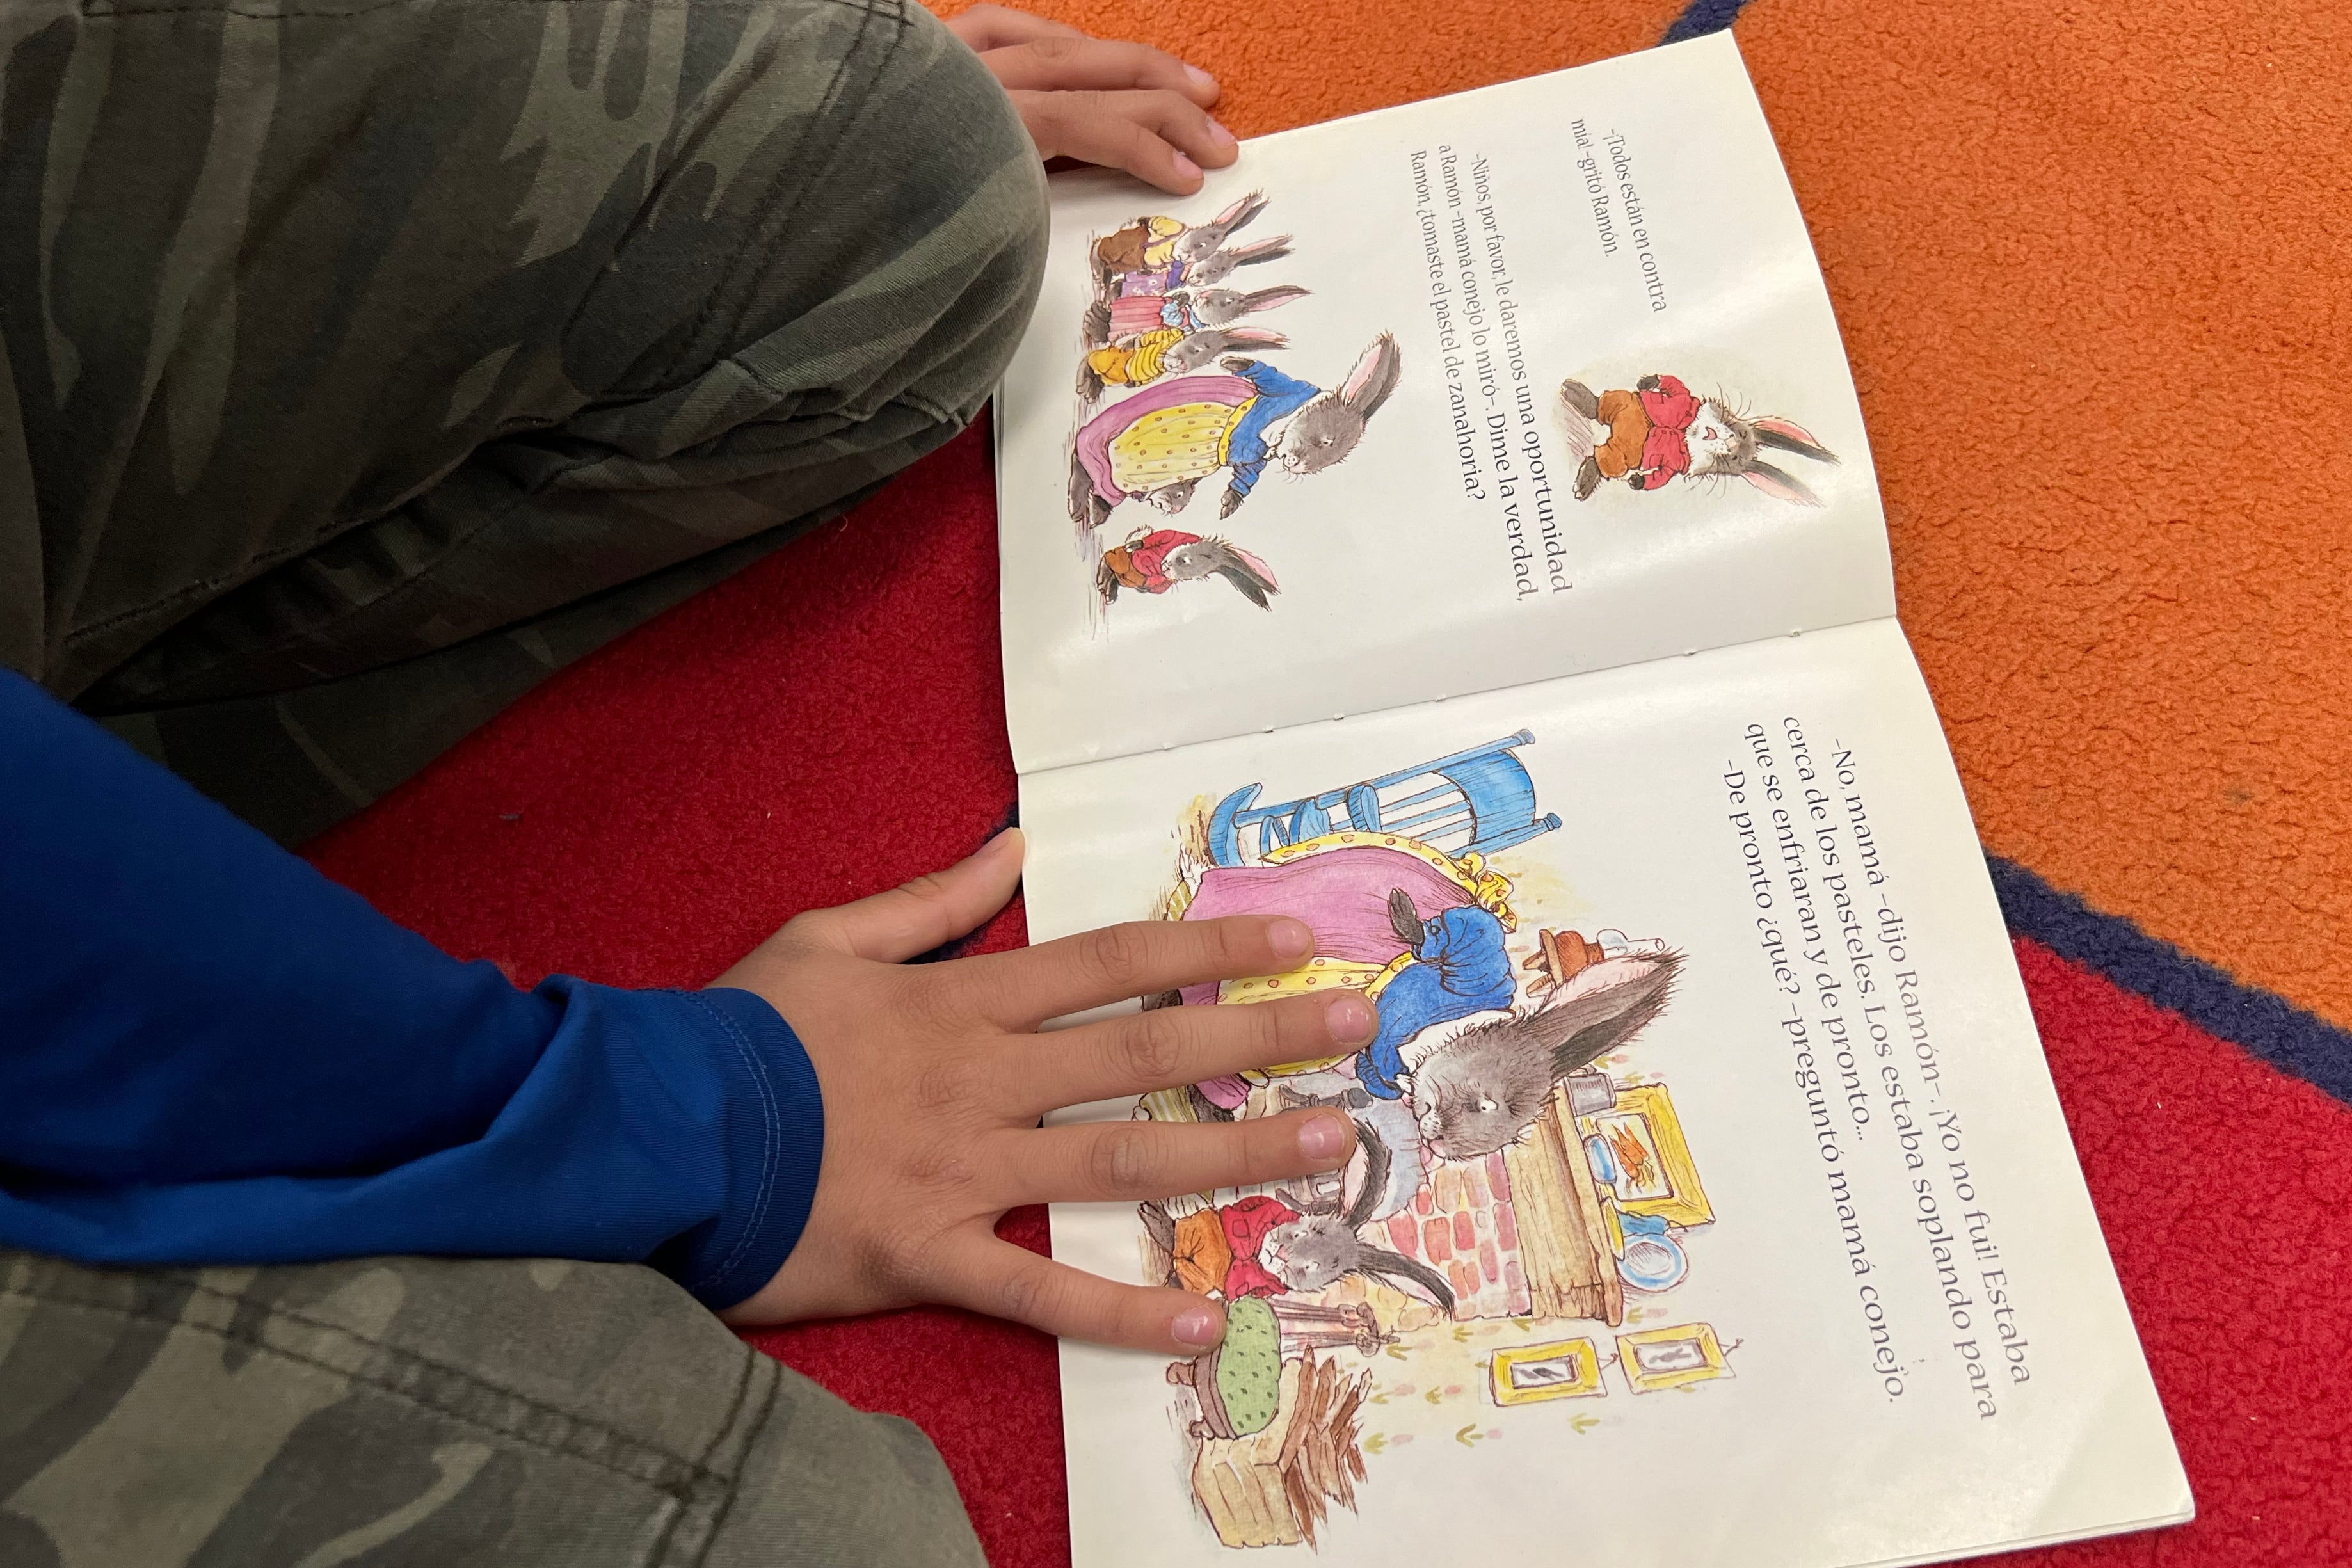 Close up of a young student's hands holding down the pages of a book on a colorful rug.